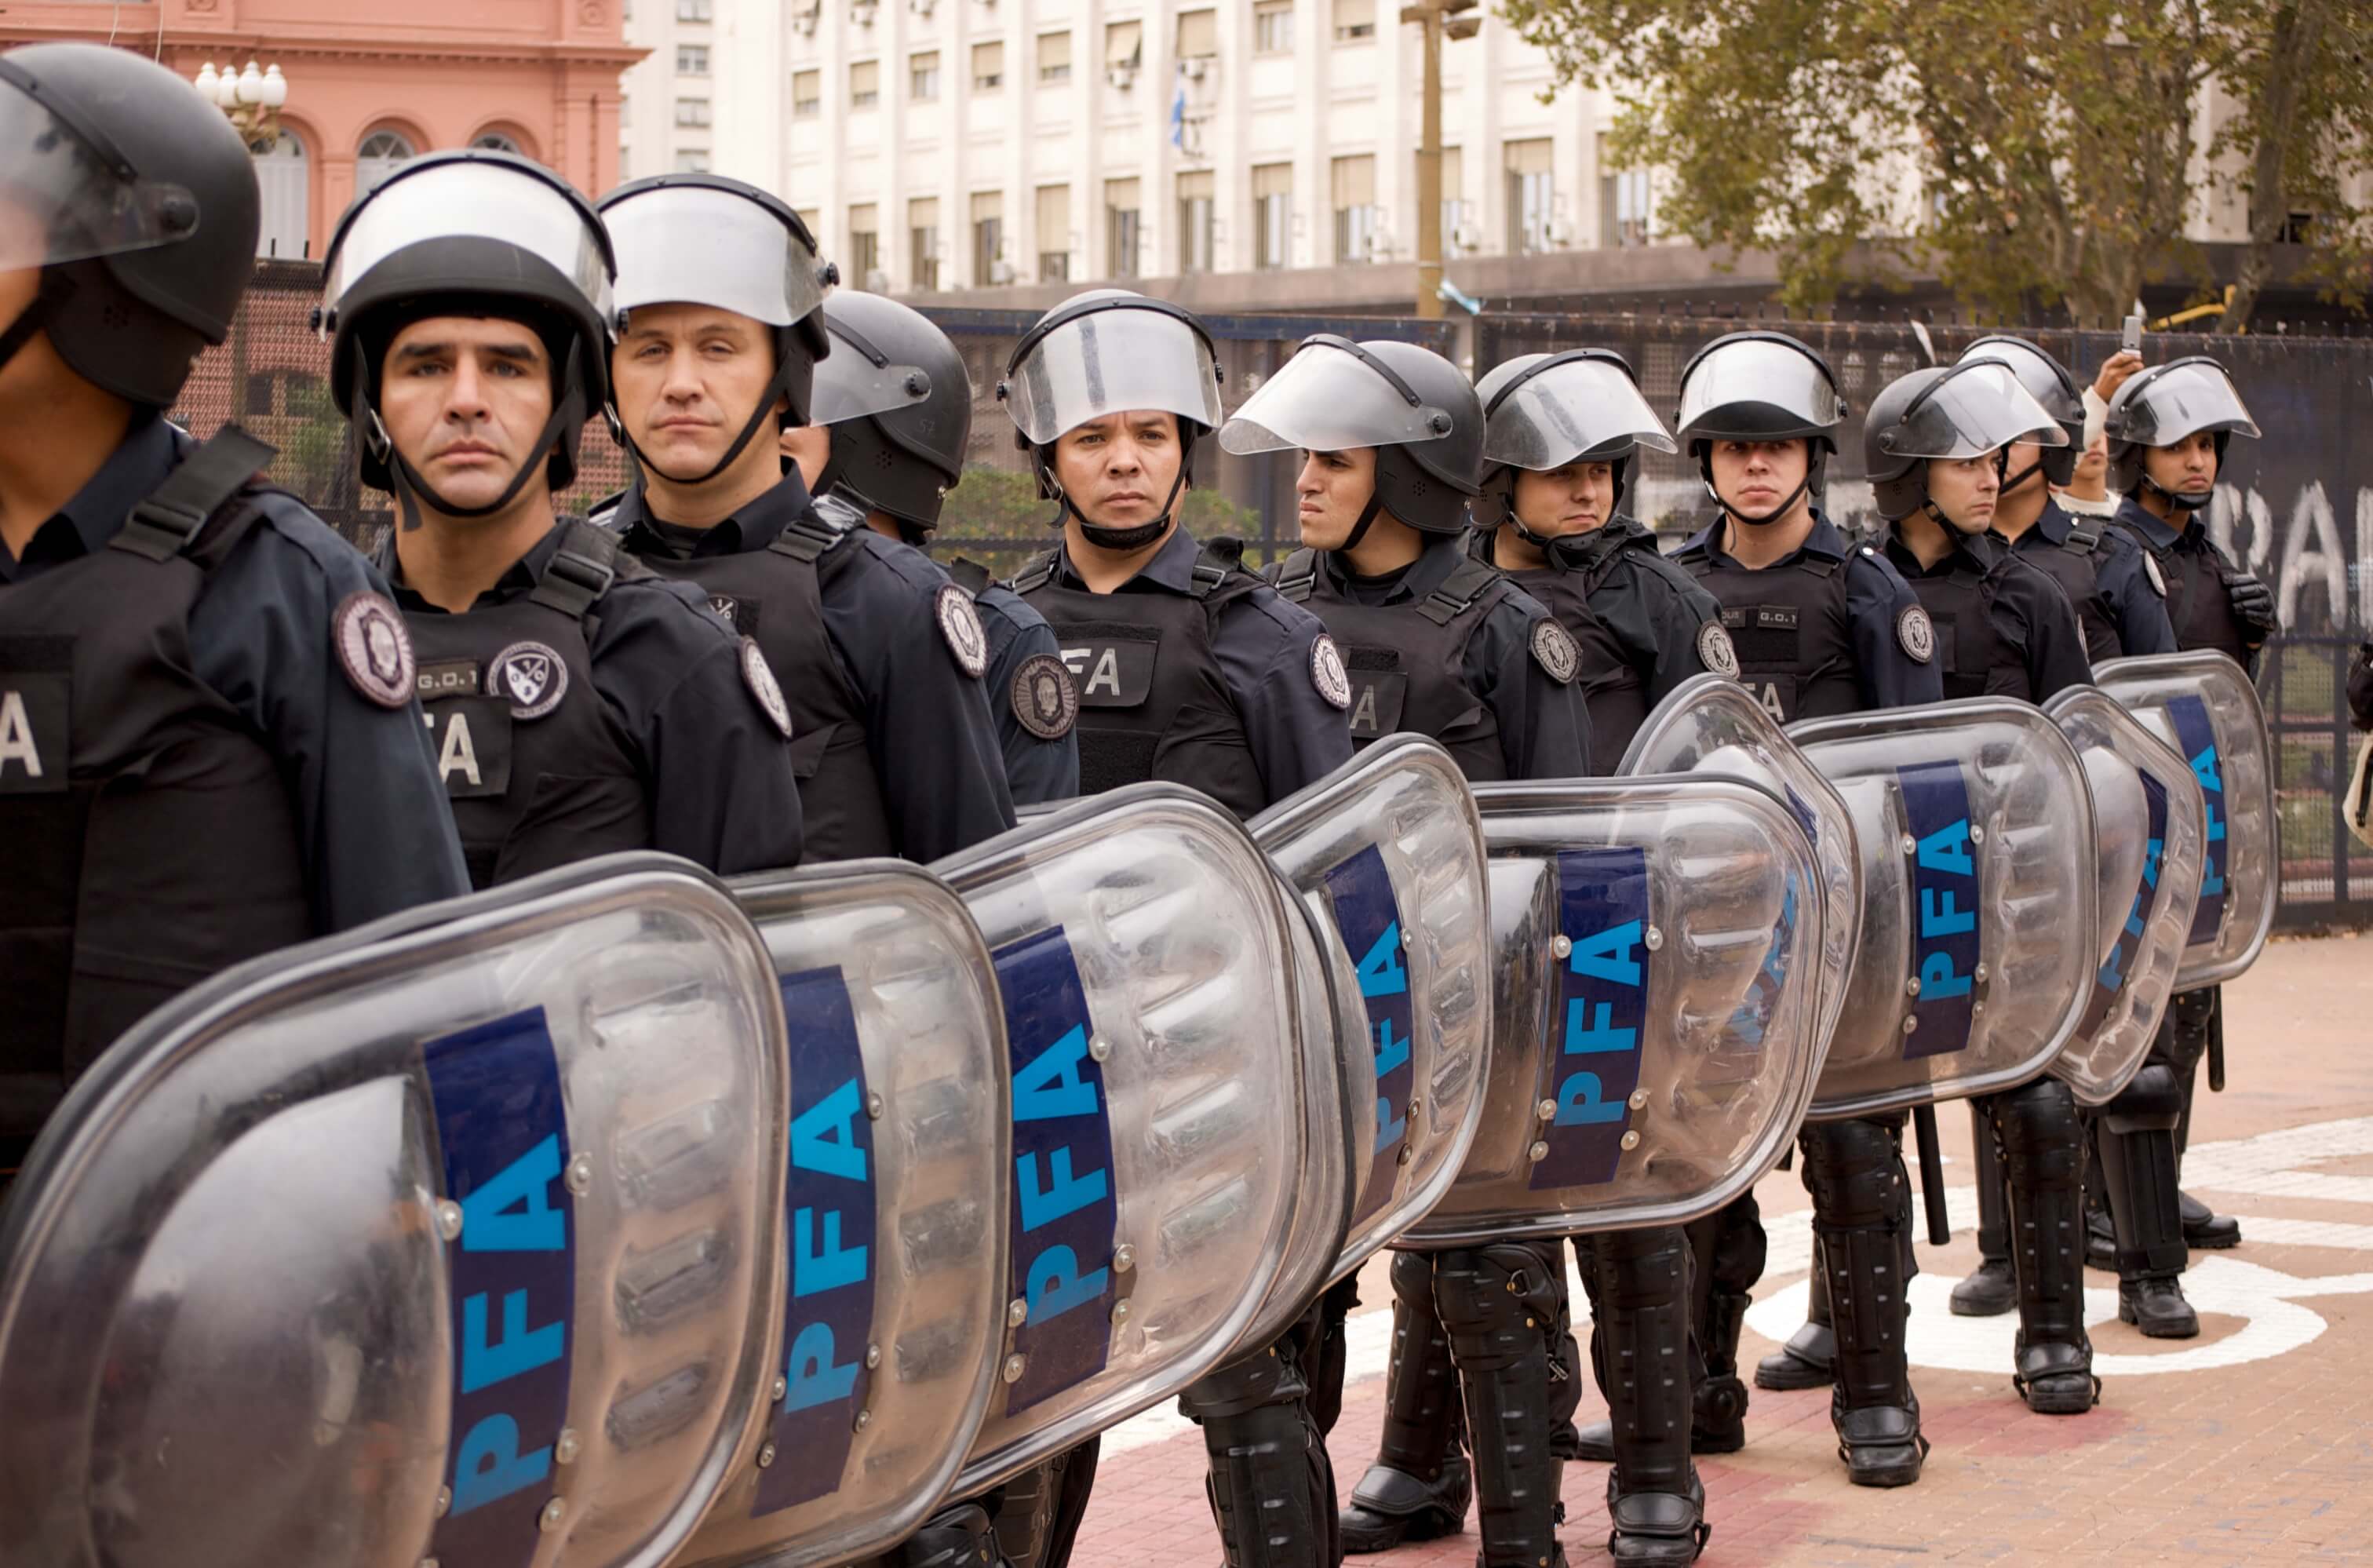 Case of dead police cadet in Argentina sparks controversy